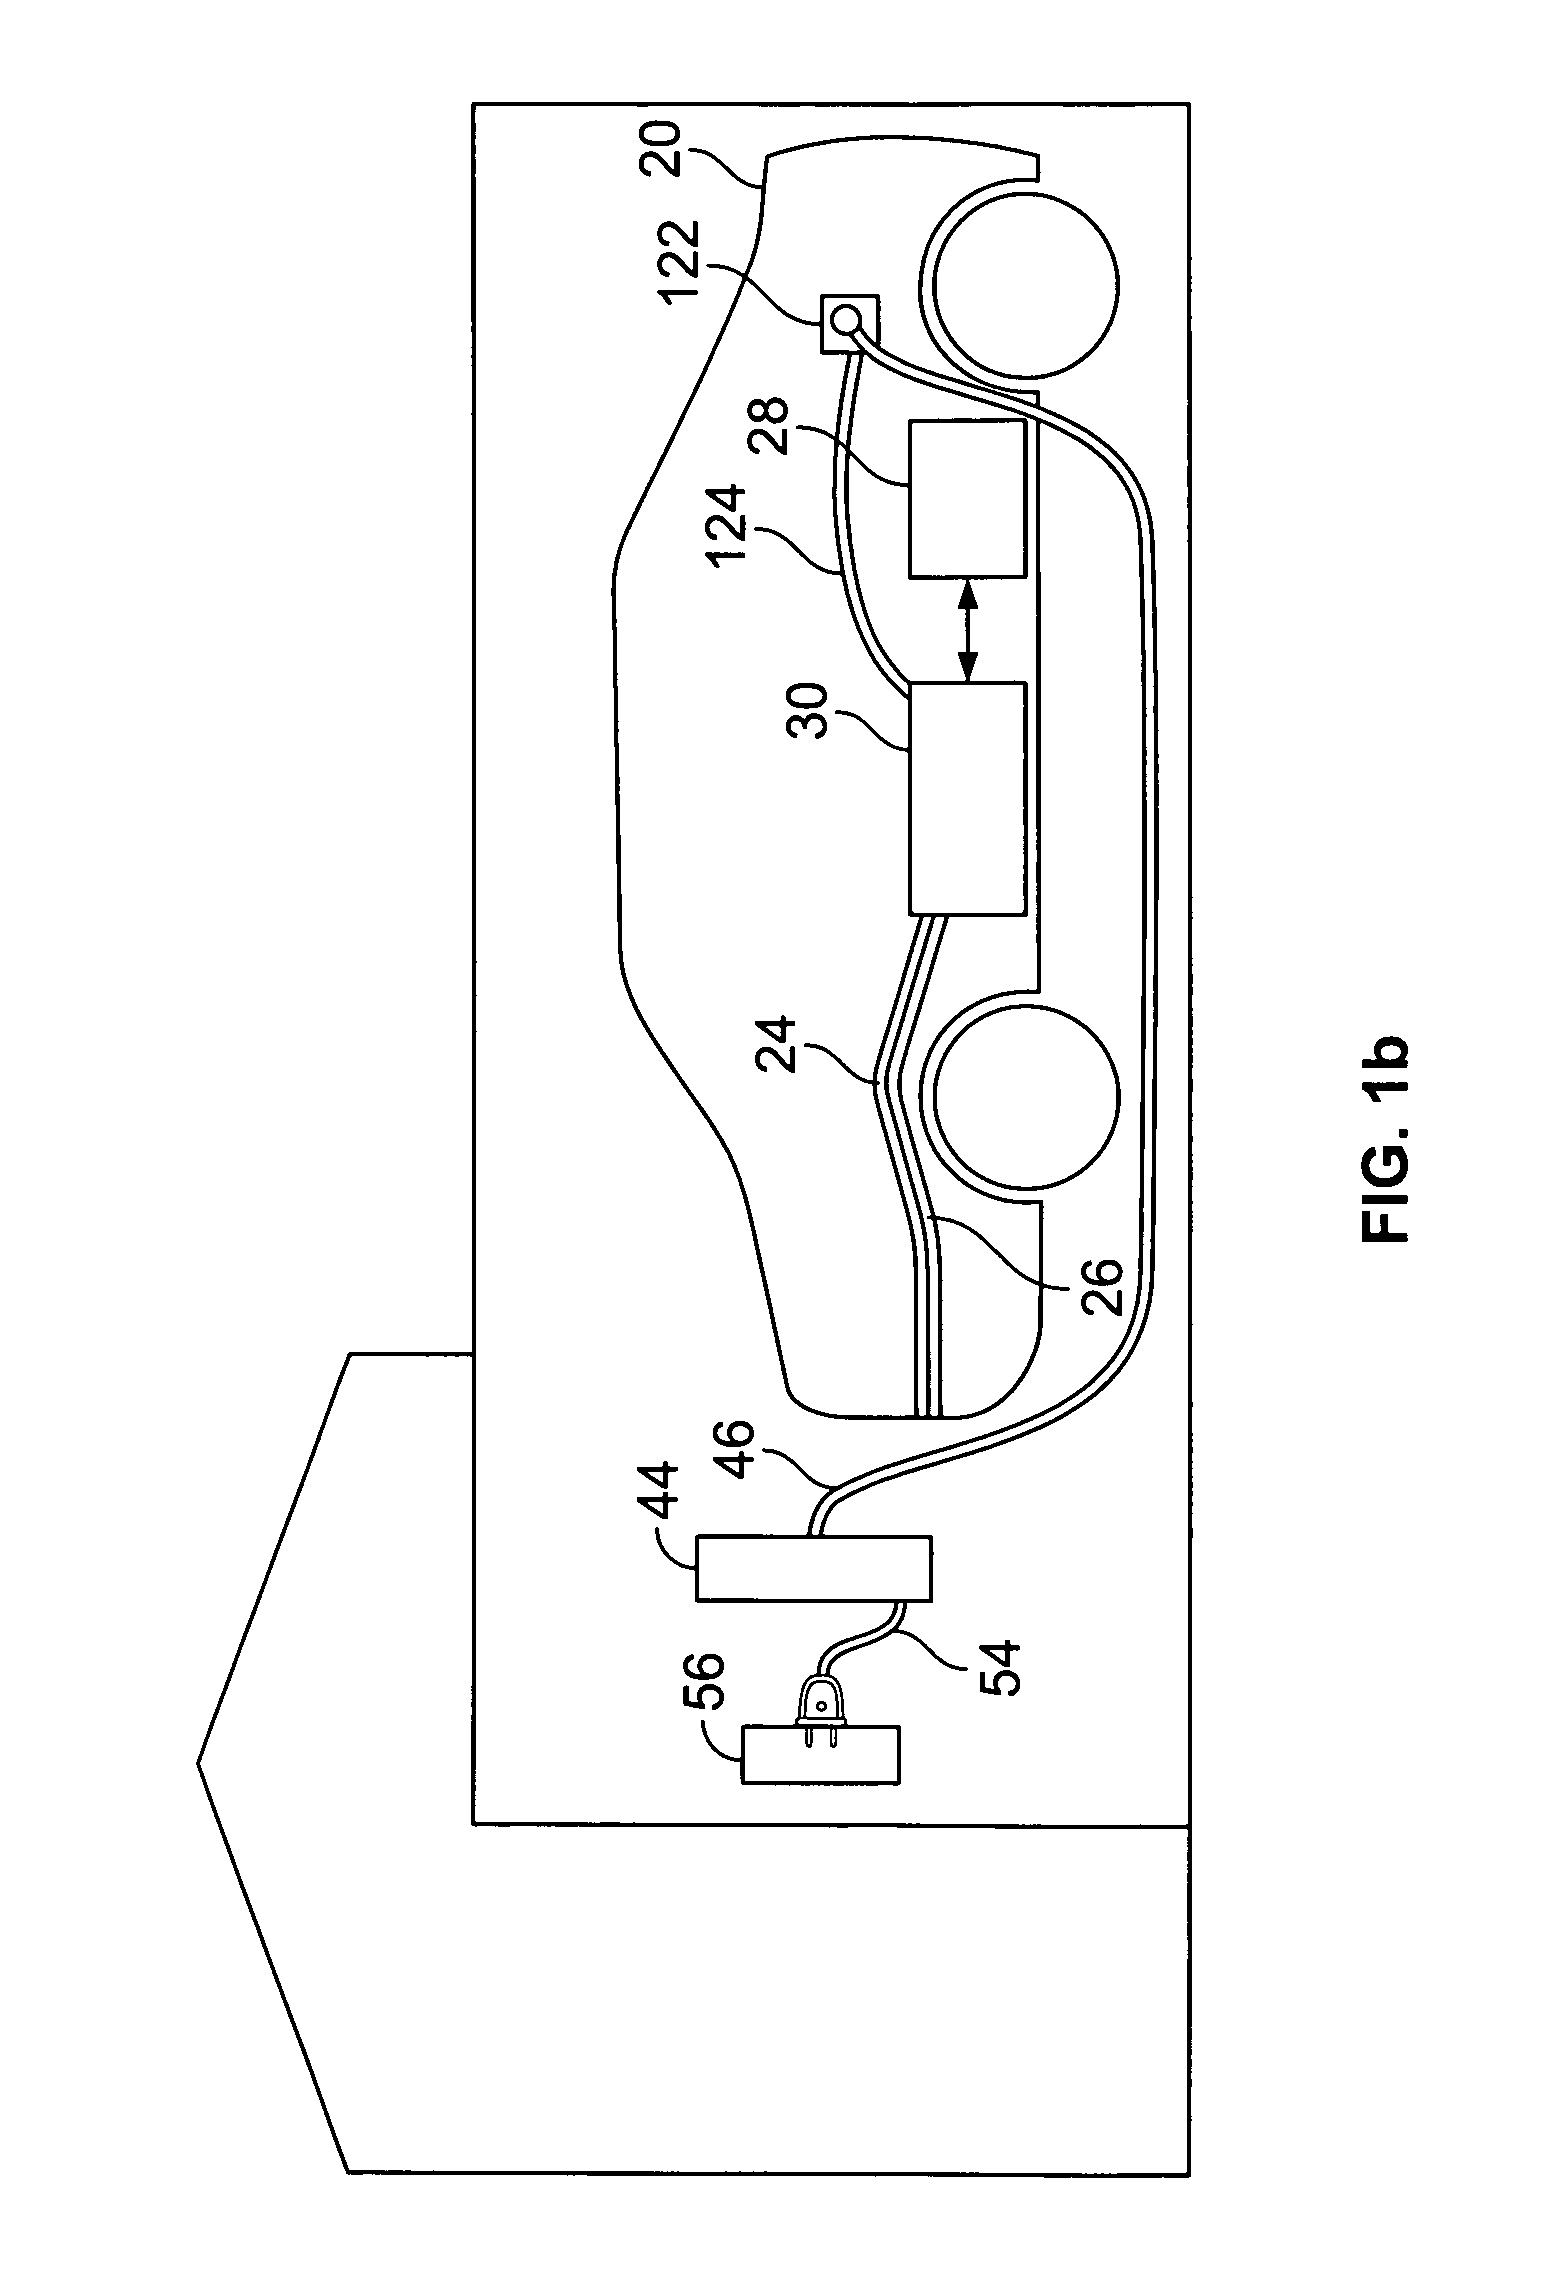 System and method for recharging electric vehicle batteries